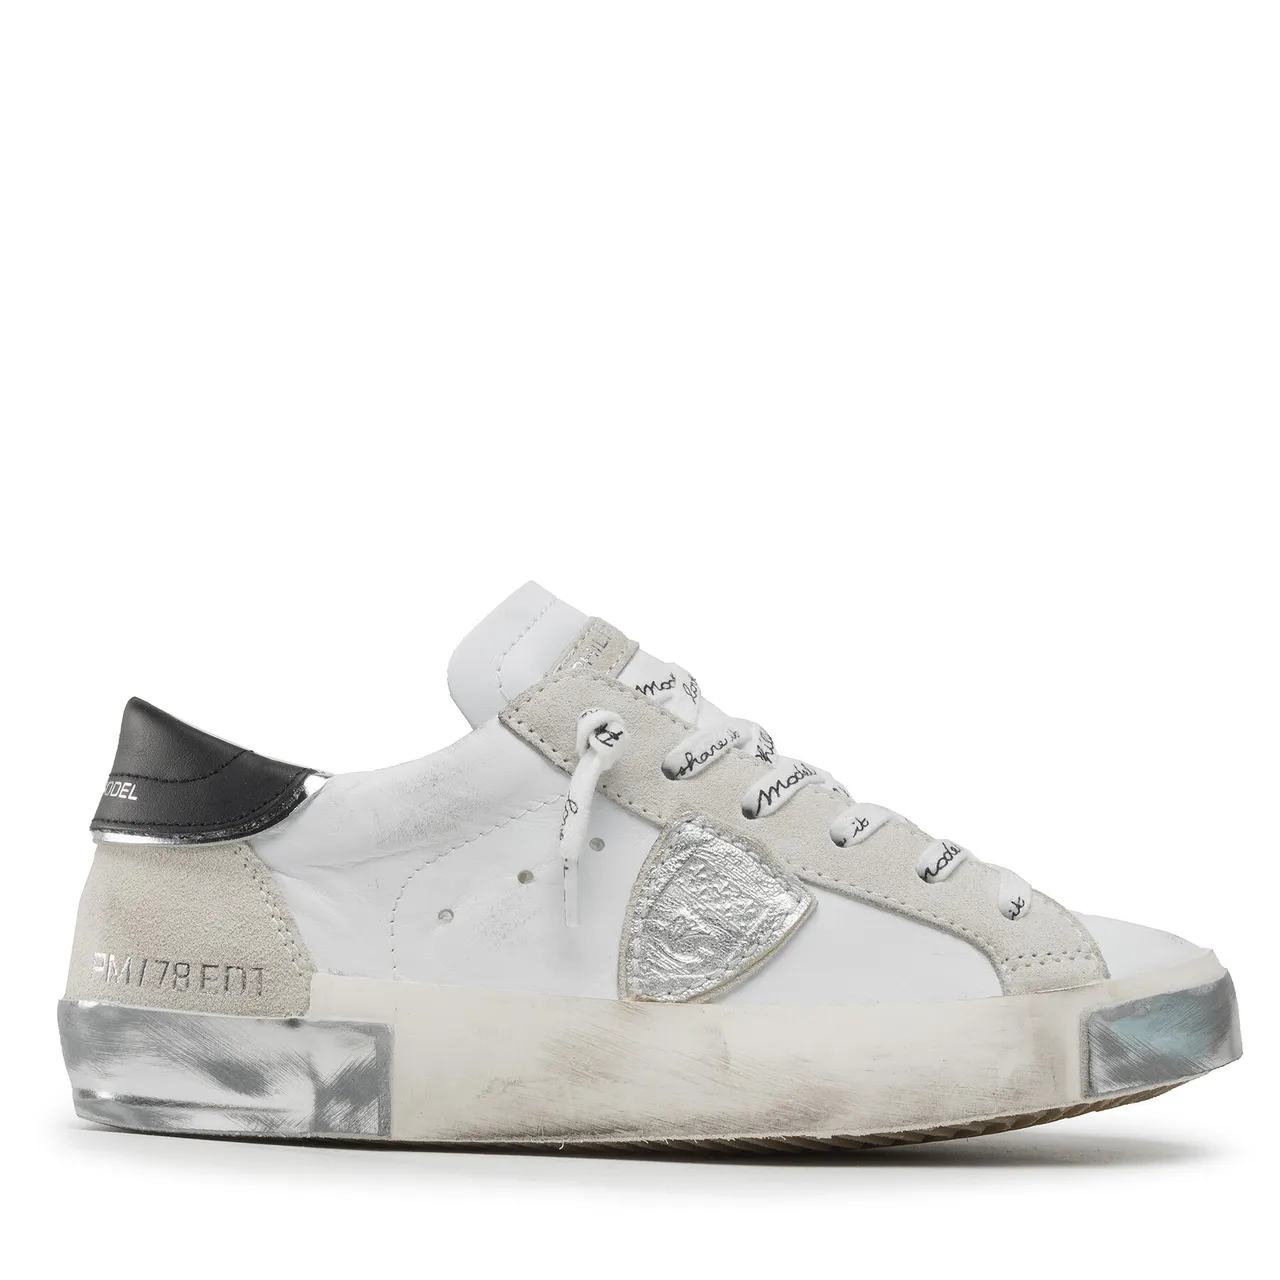 Sneakers Philippe Model Prsx PRLD MA02 Blanc Argent